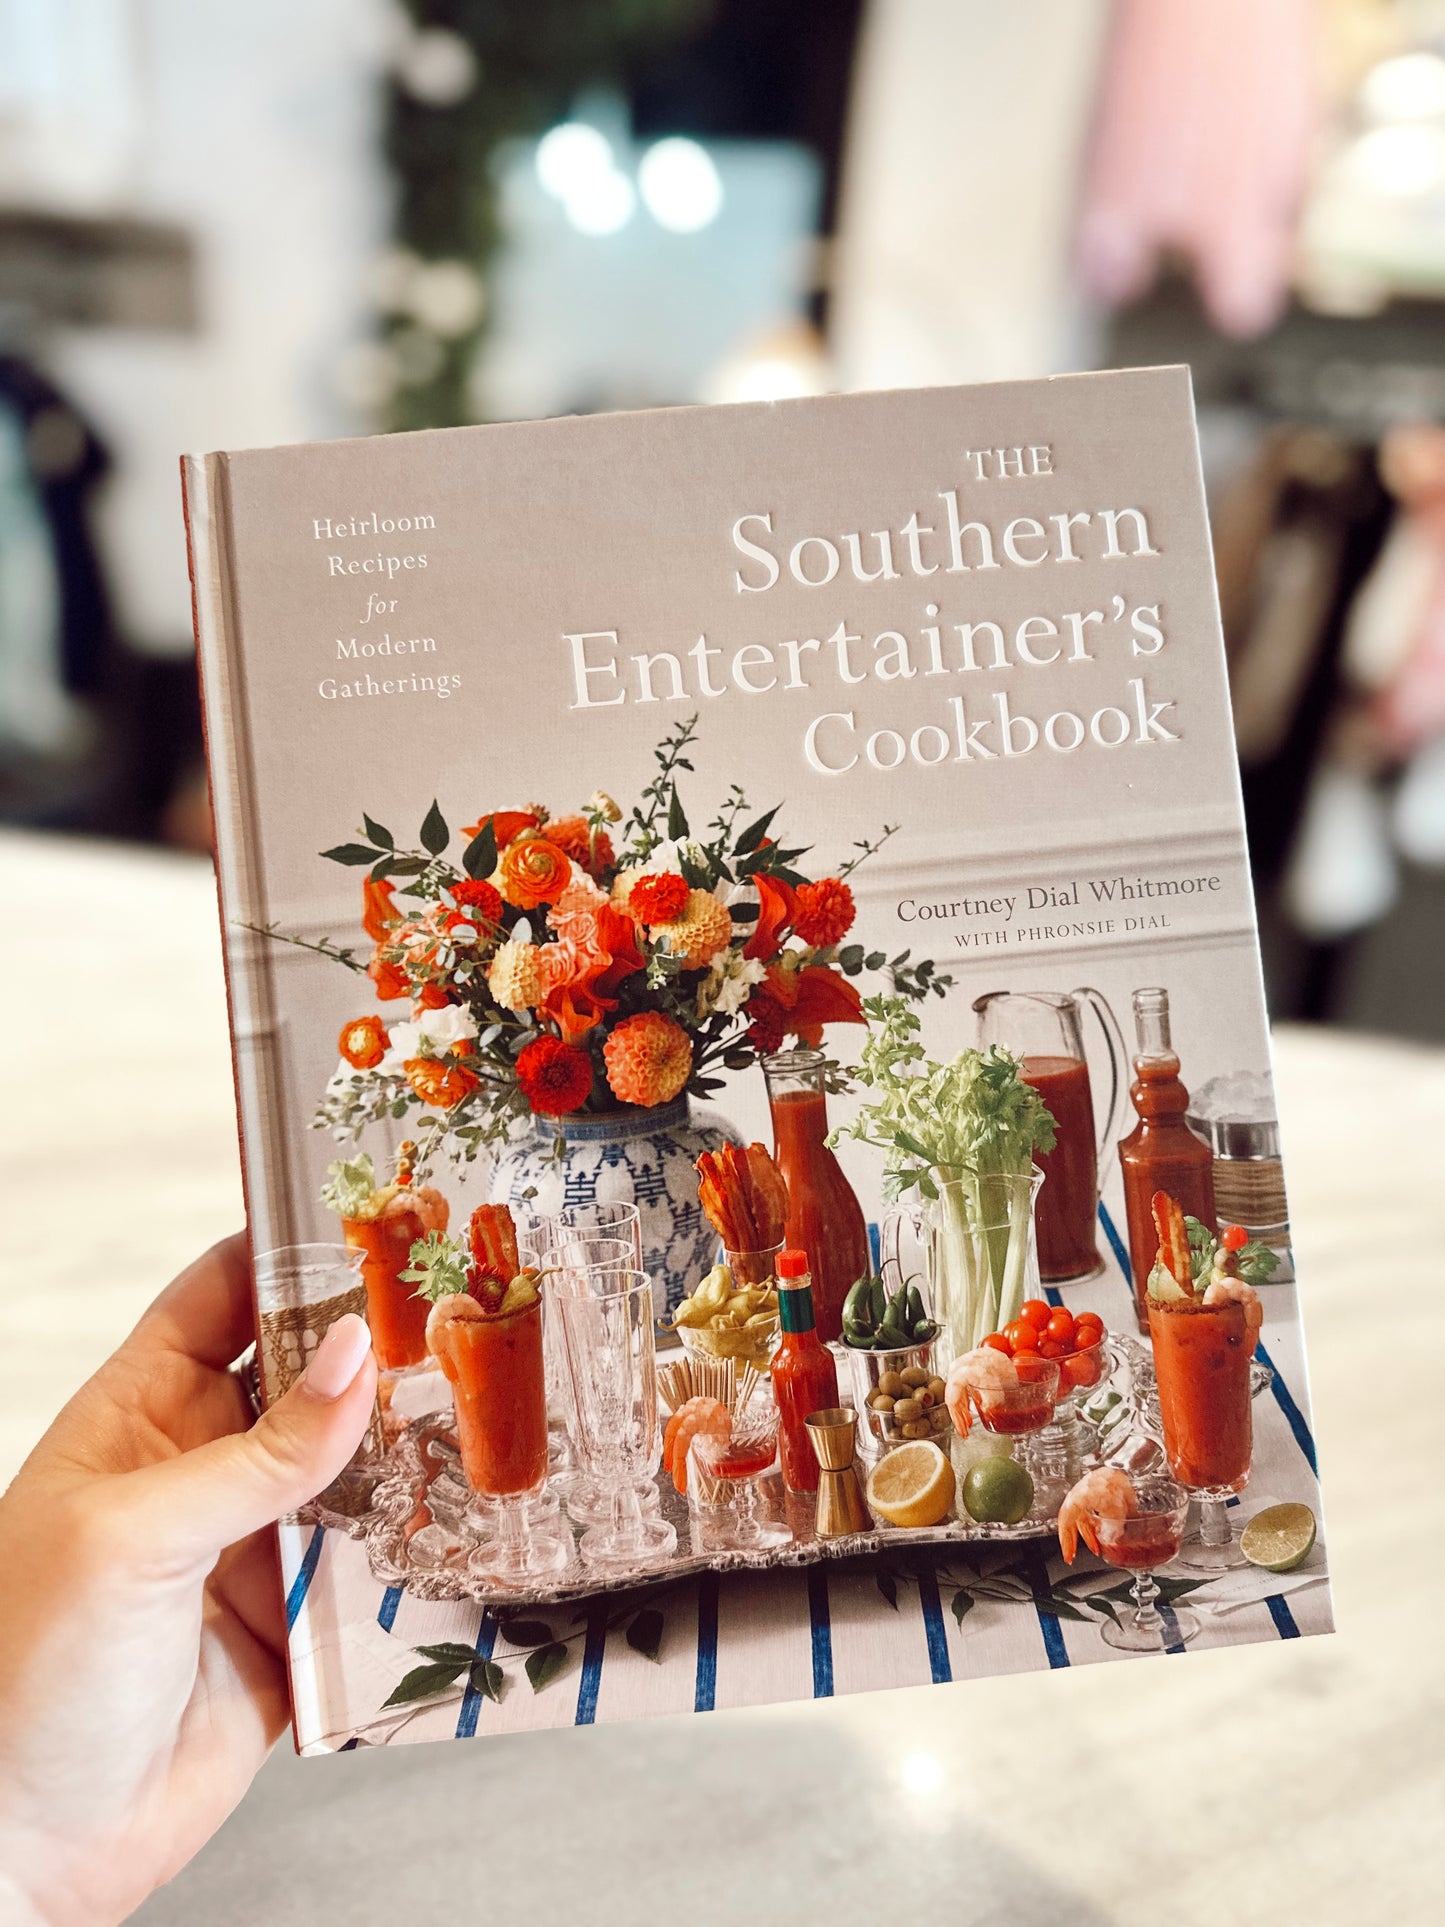 Southern Entertainer's Cookbook